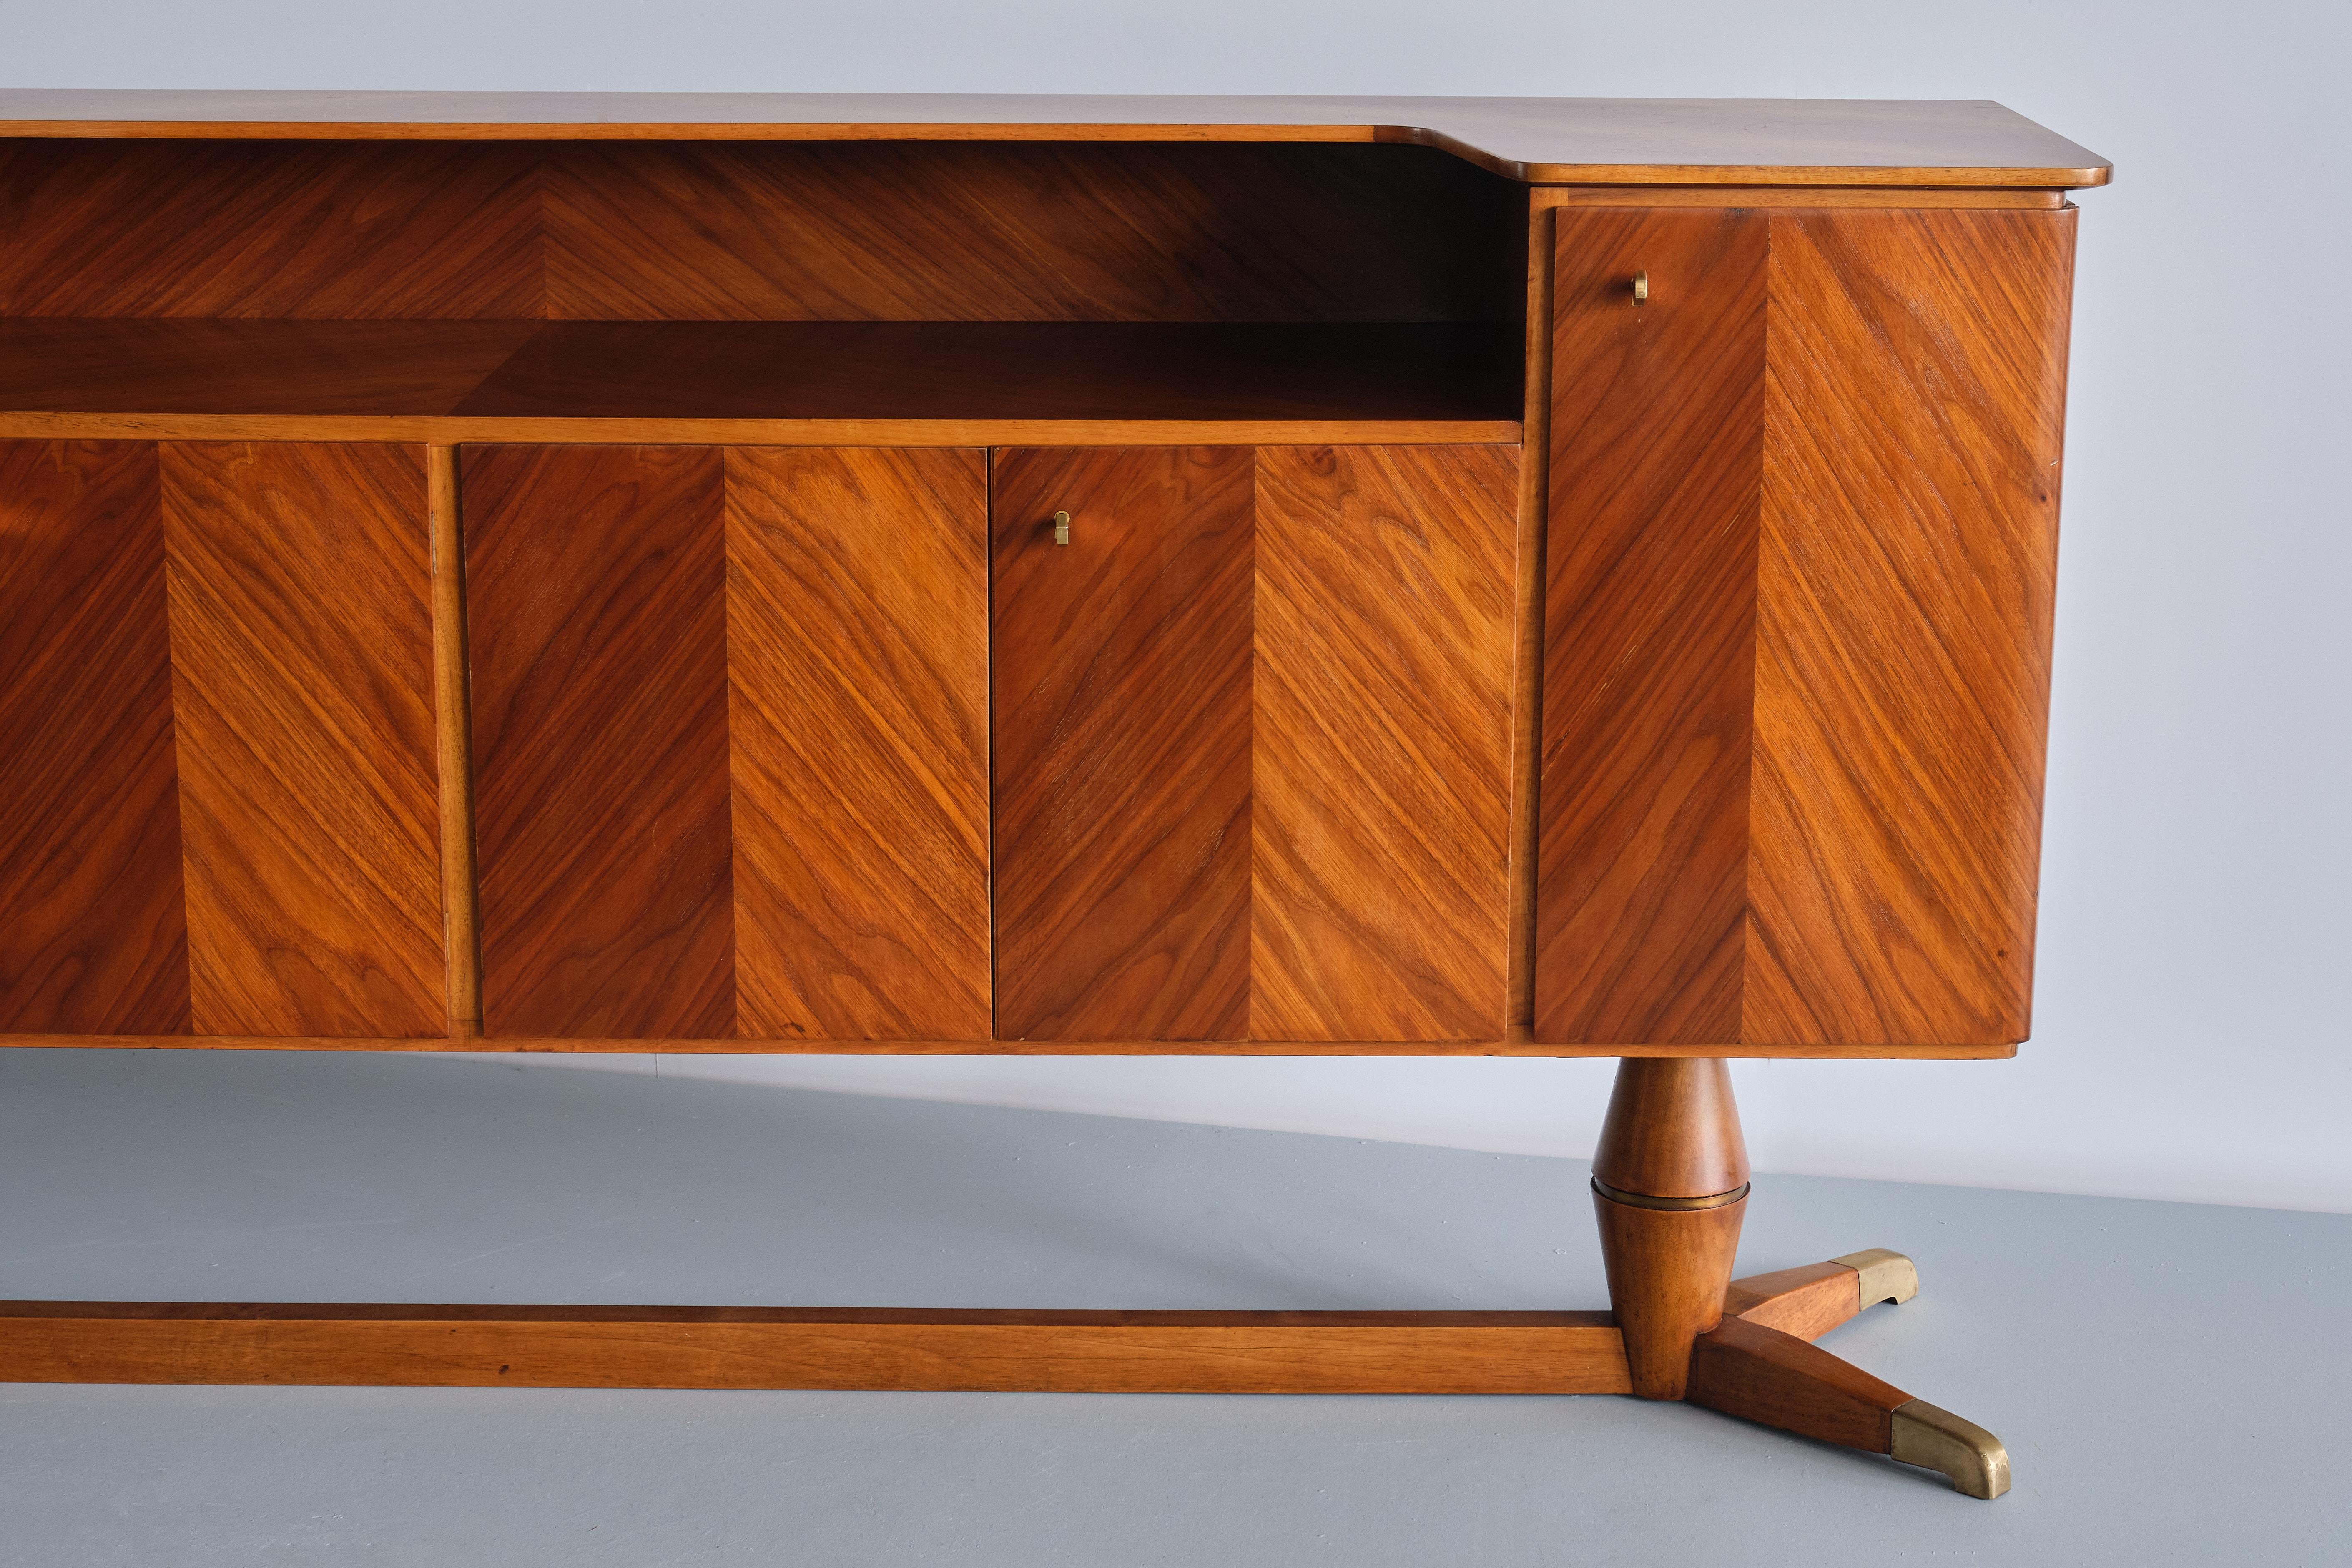 Paolo Buffa Attributed Sideboard in Walnut and Brass, Serafino Arrighi, 1940s For Sale 2